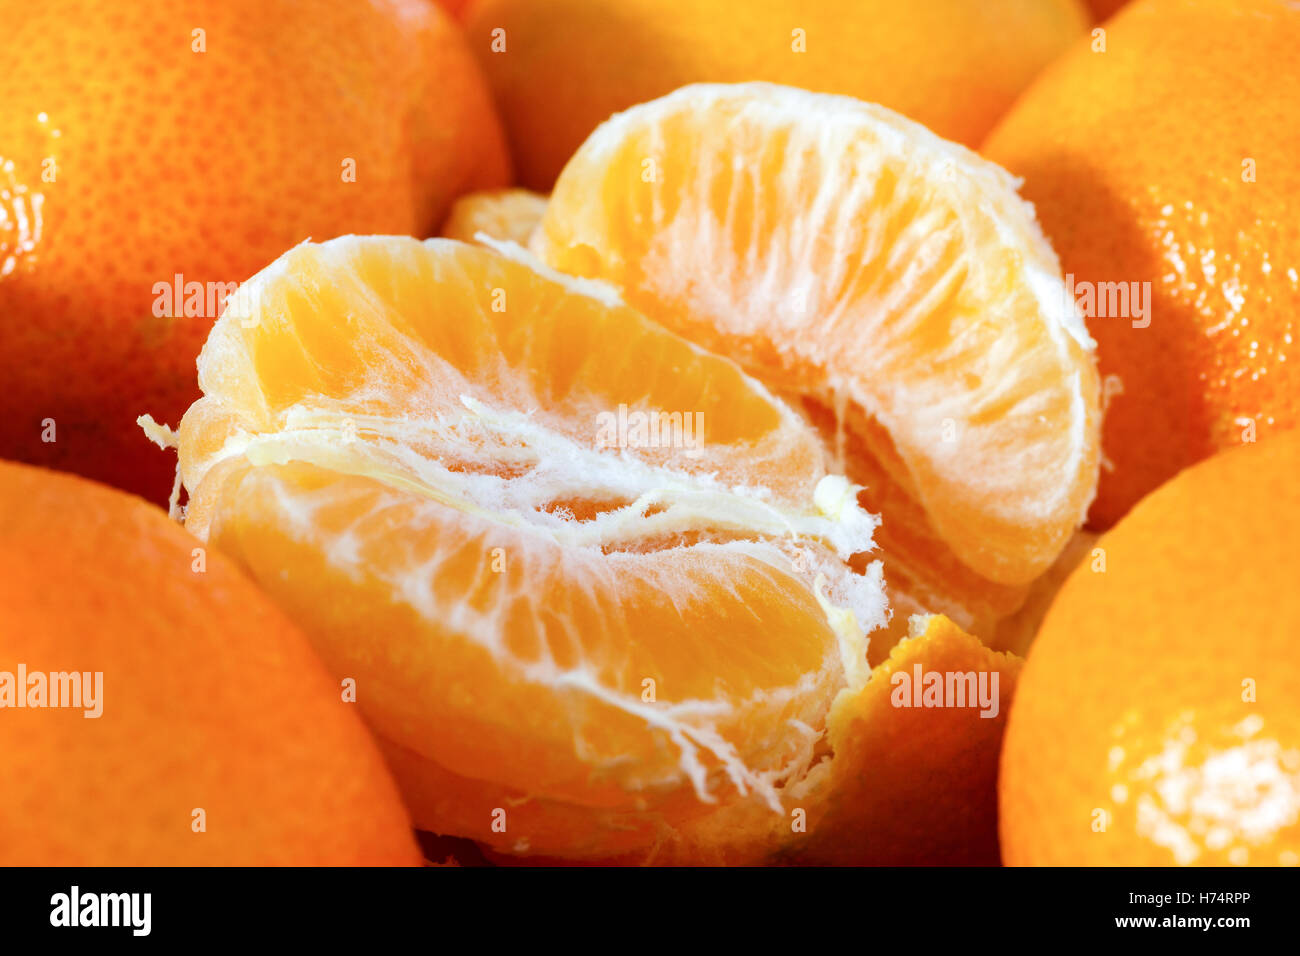 Half peeled tangerine surrounded by unpeeled tangerines Stock Photo